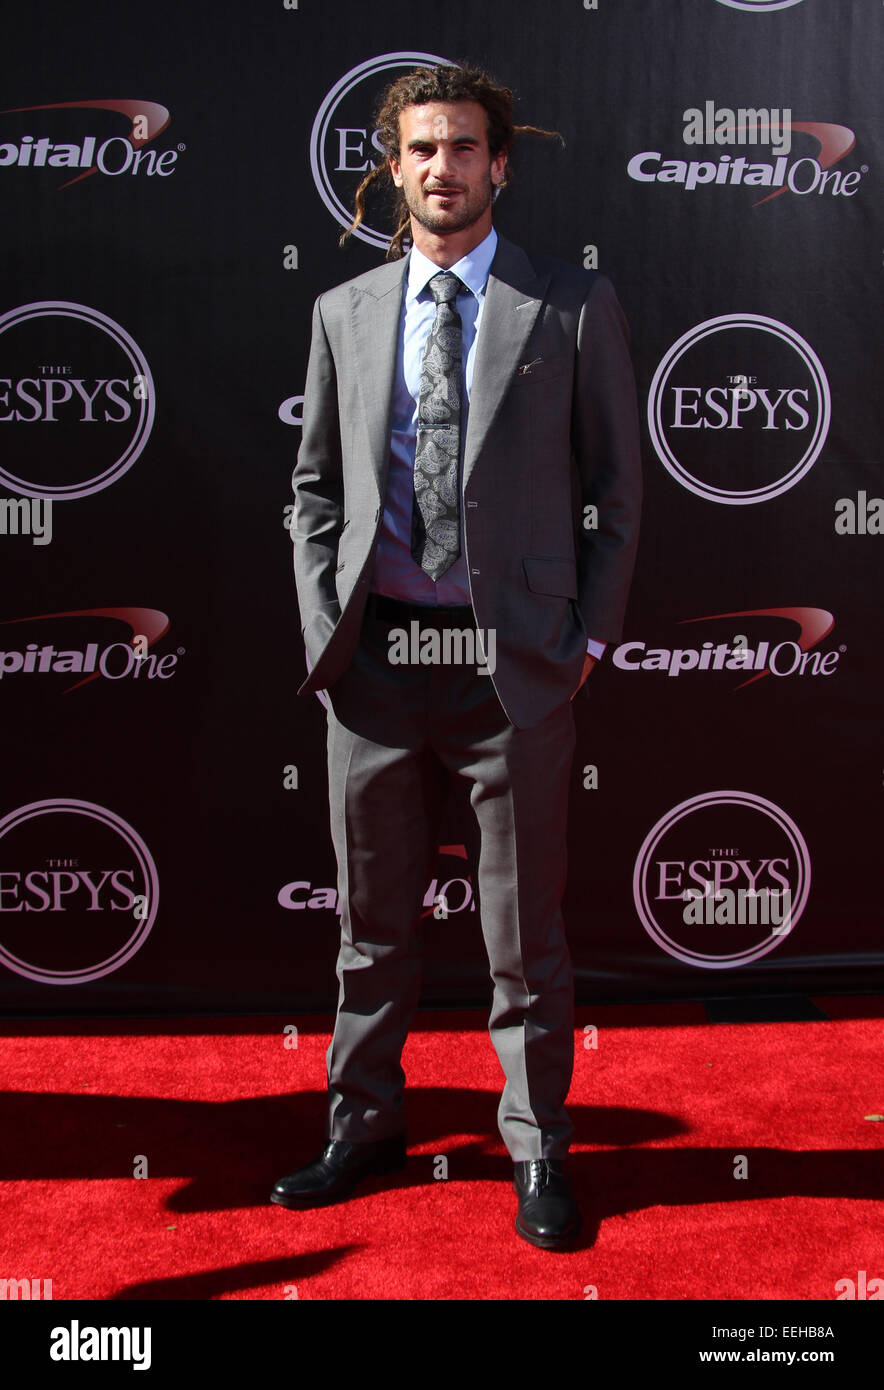 2014 ESPYS Awards - Arrivals  Featuring: Kyle Beckerman Where: Los Angeles, California, United States When: 16 Jul 2014 Stock Photo